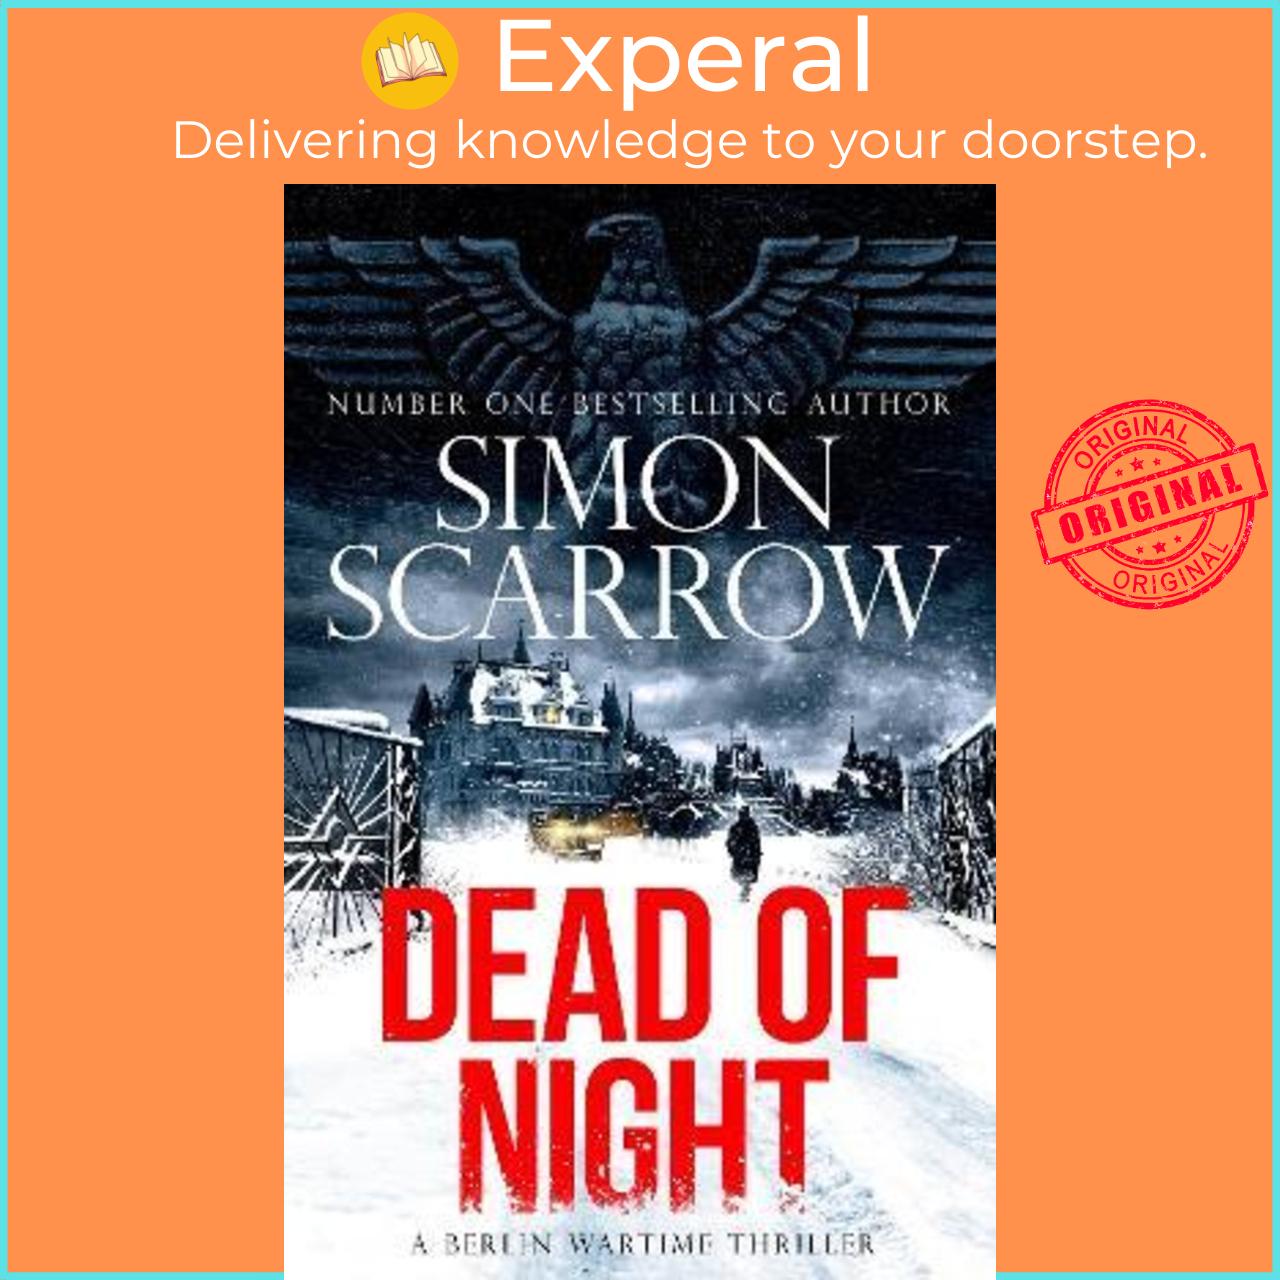 Sách - Dead of Night : The chilling new thriller from the bestselling author by Simon Scarrow (UK edition, hardcover)